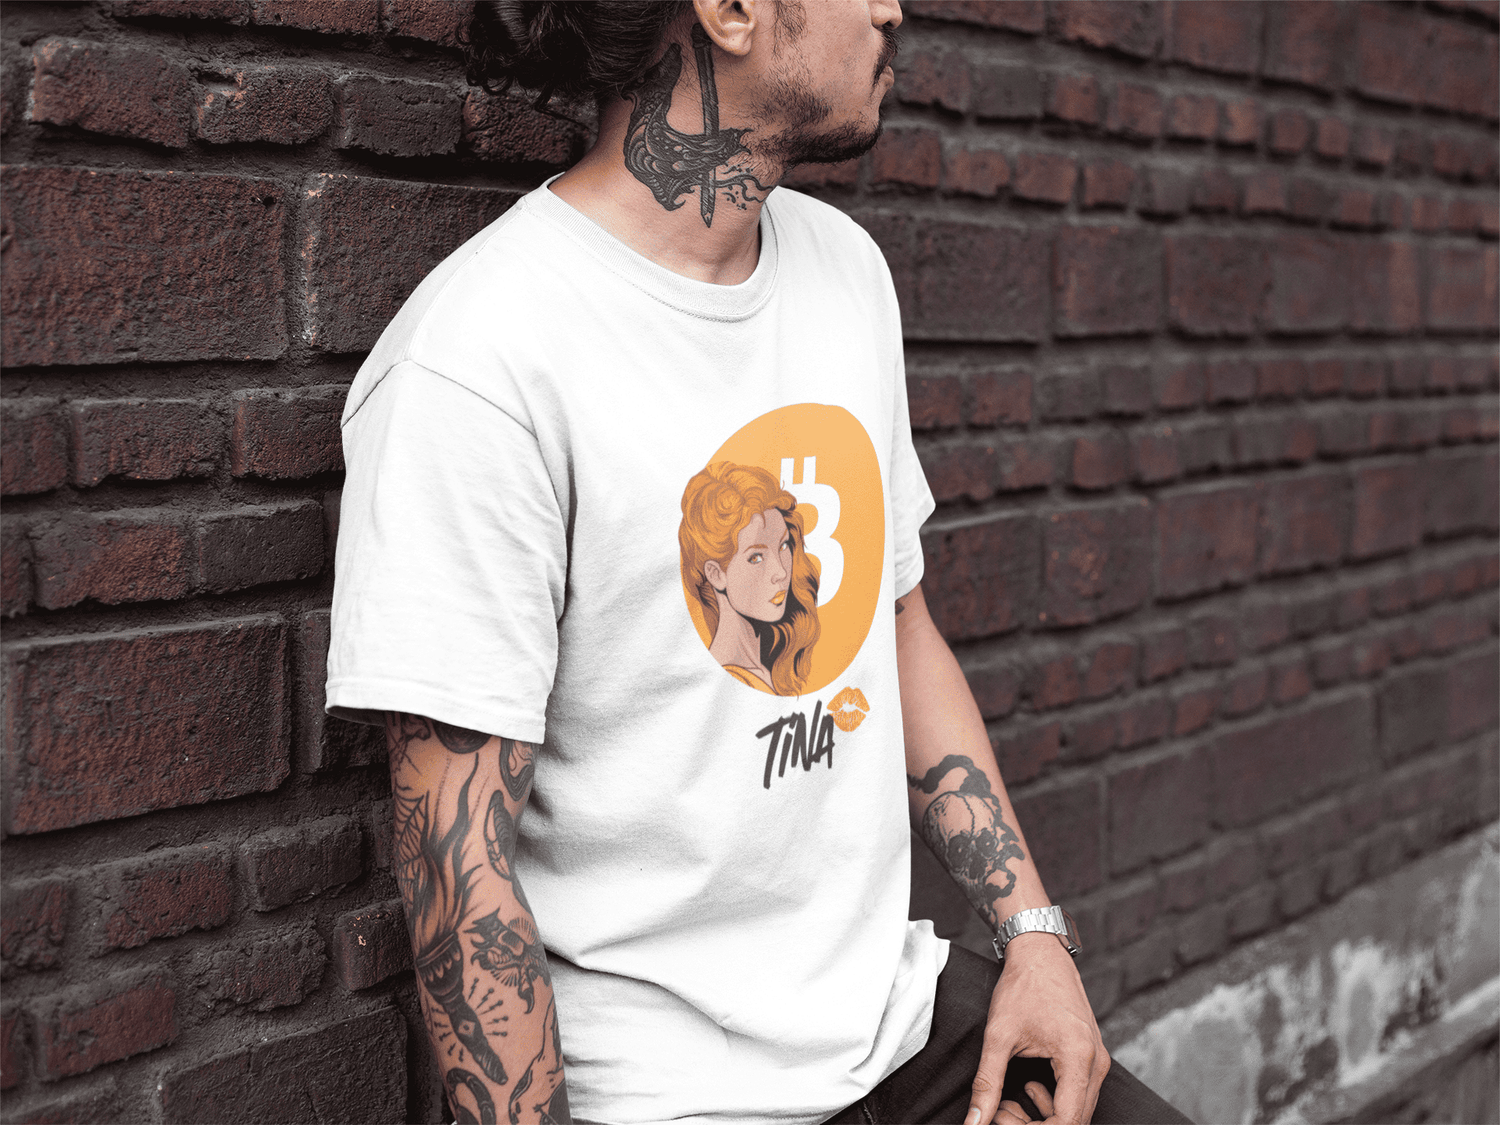 Tattooed middle aged man wearing a white bitcoin t-shirt while leaning against a bricks wall.